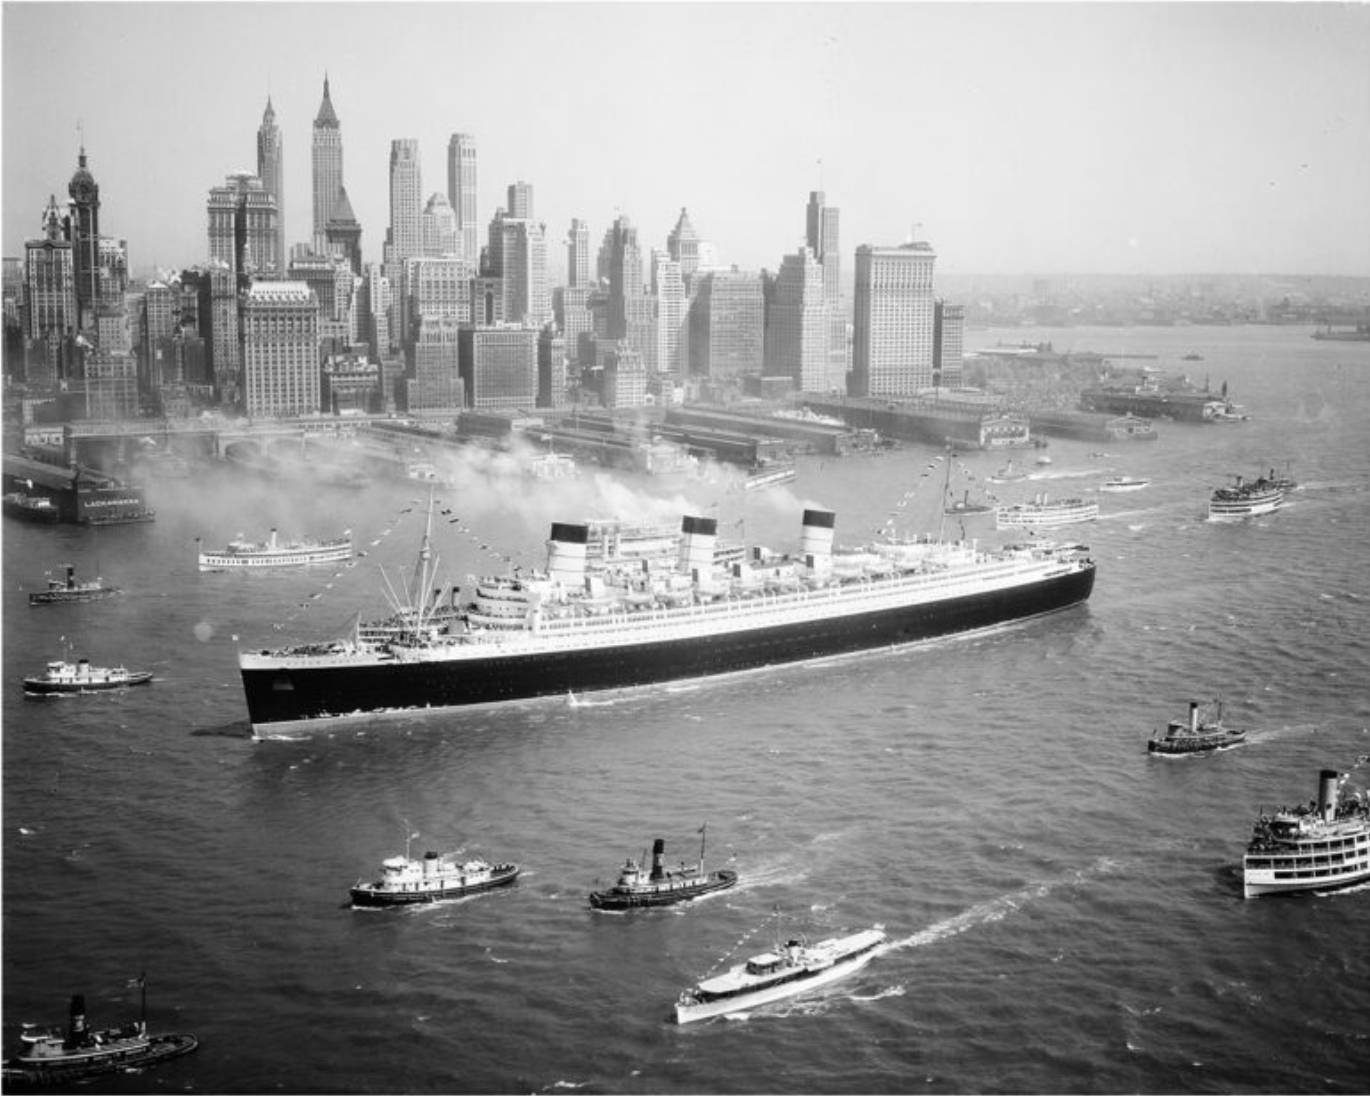 📸 The Queen Mary's arrival into New York in 1936